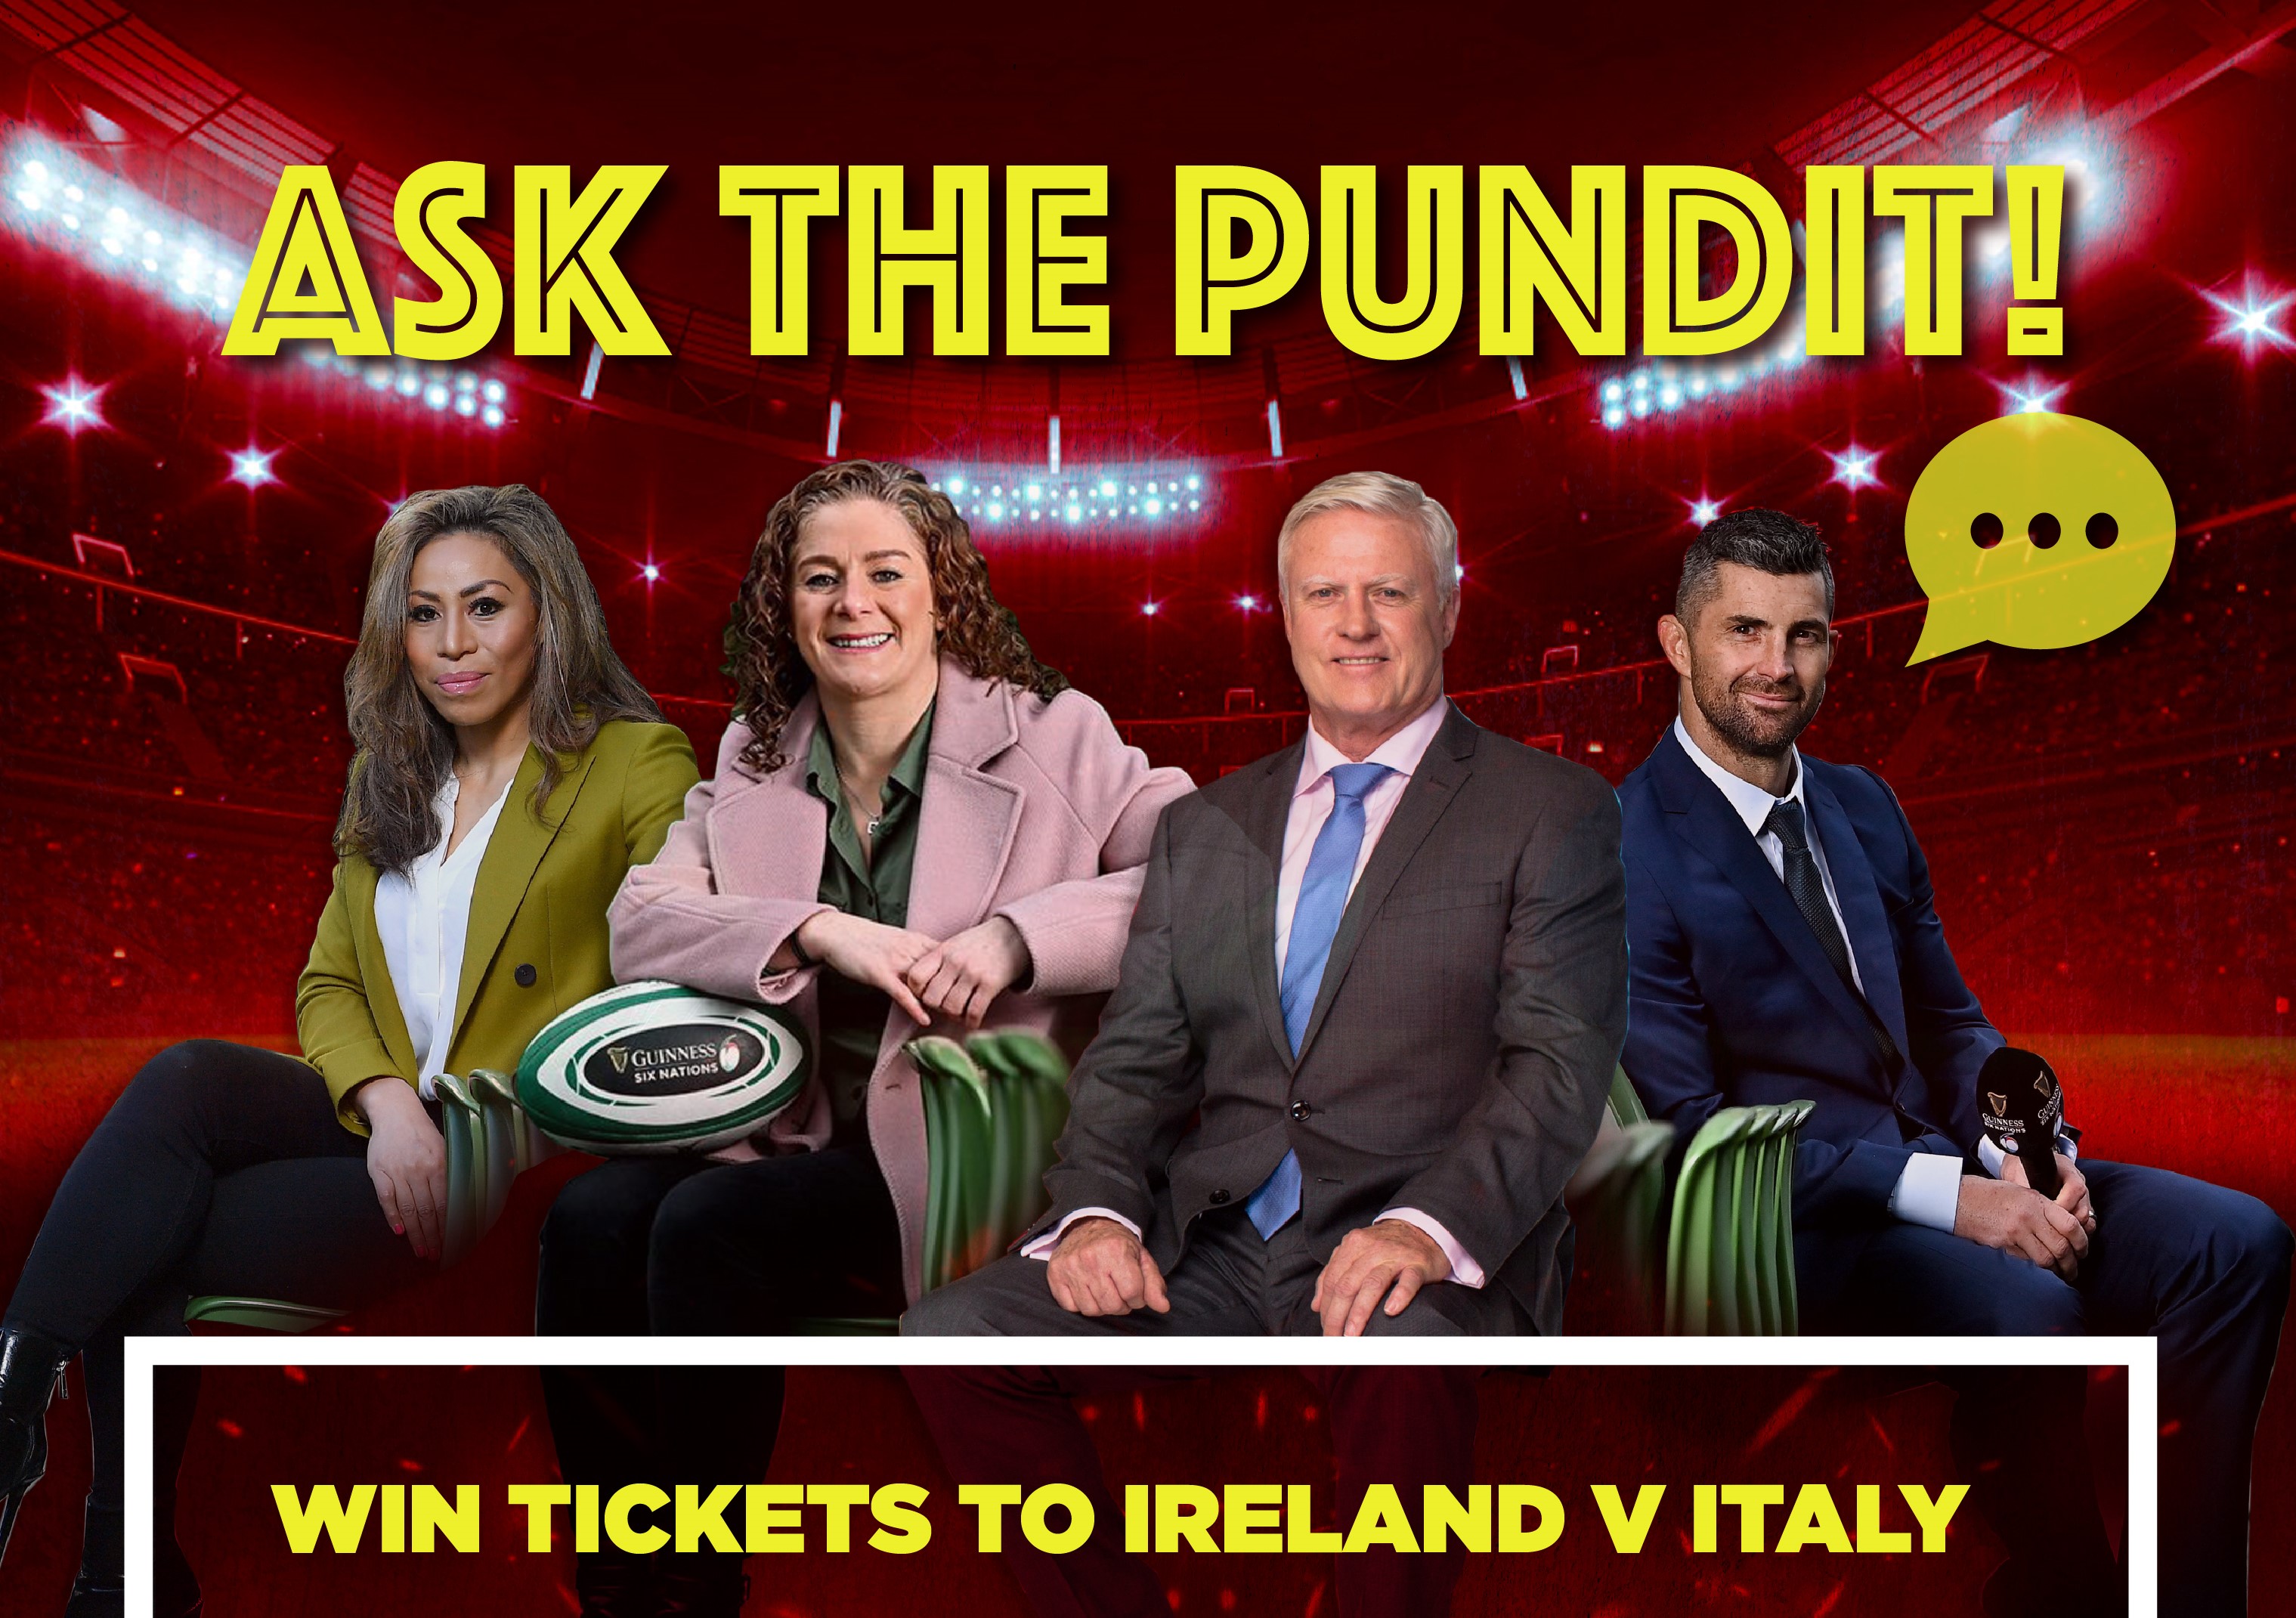 Ask the pundit!